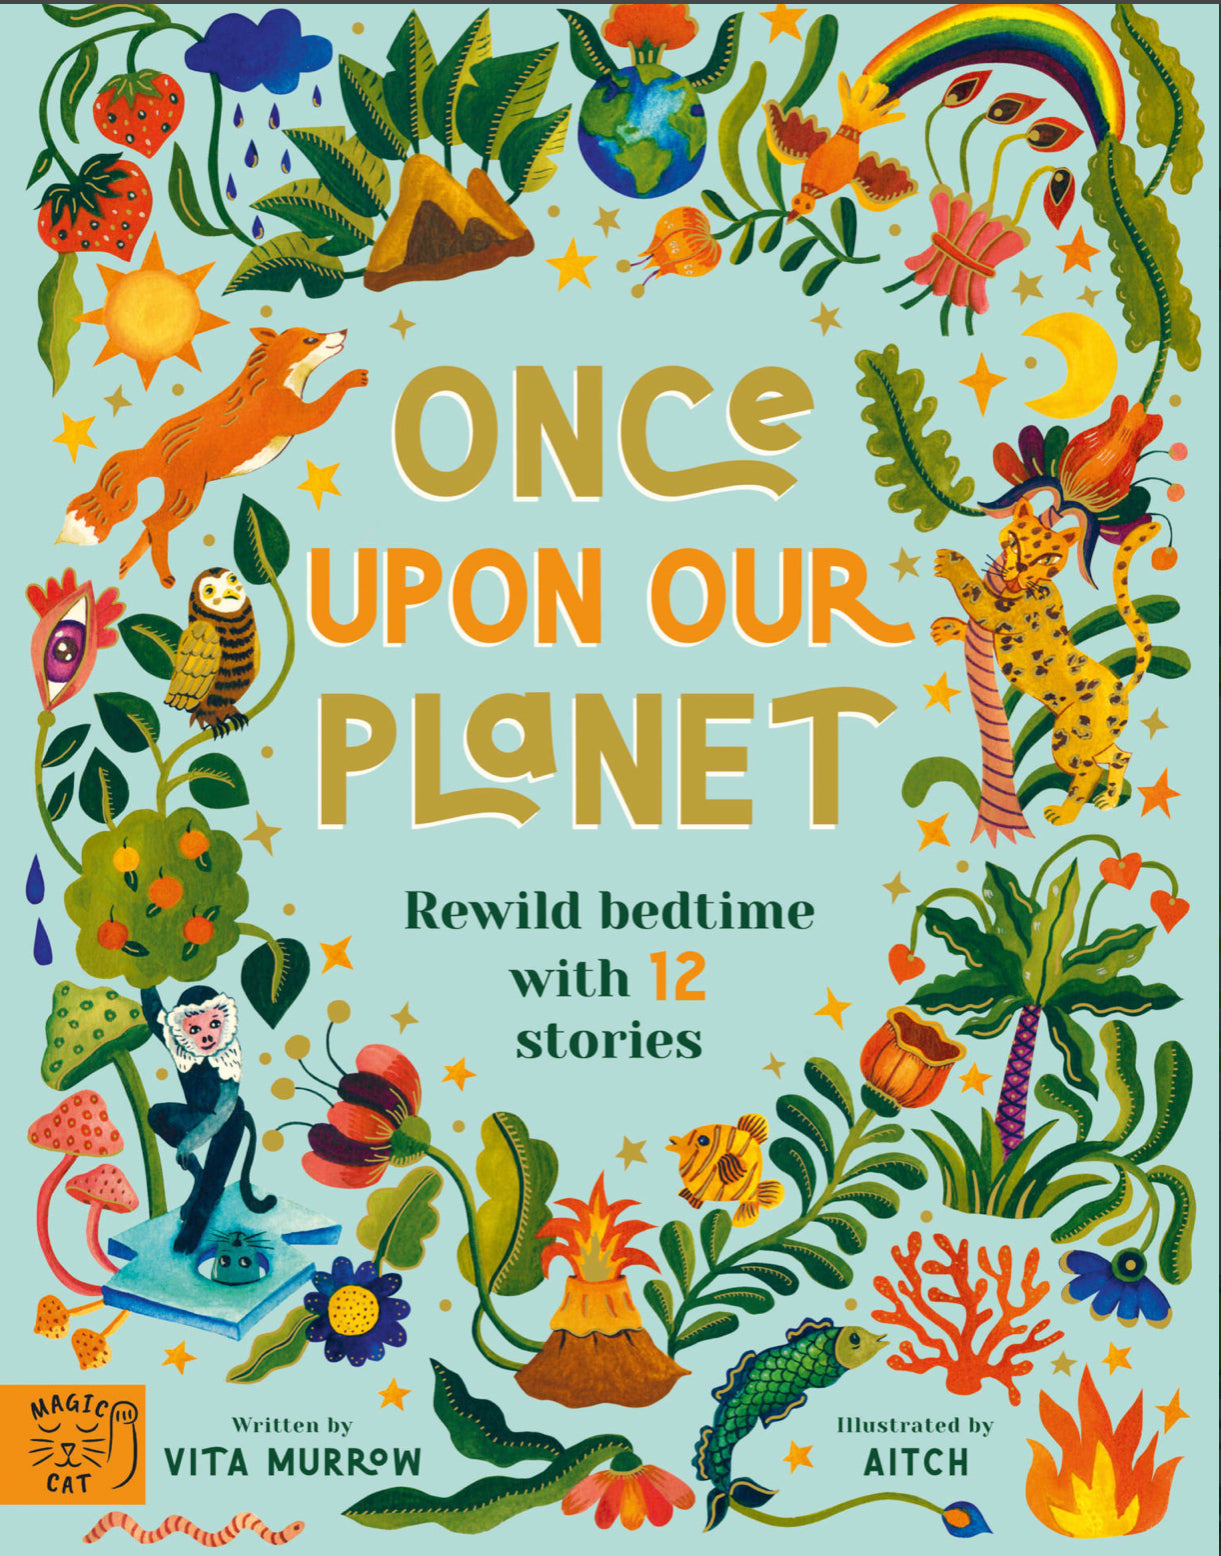 Once Upon Our Planet - by Vita Murrow & illustrated by Aitch